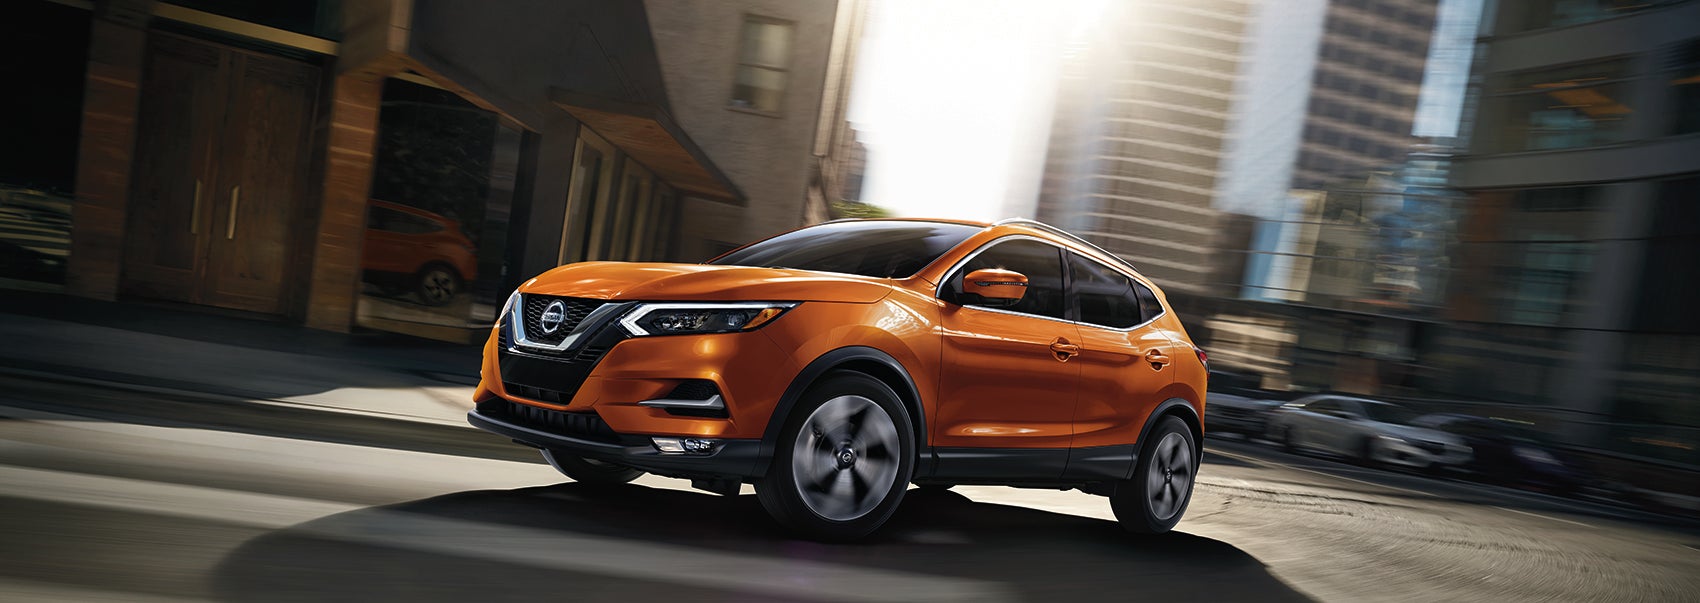 Nissan Rogue sport for sale near me Indianapolis, IN